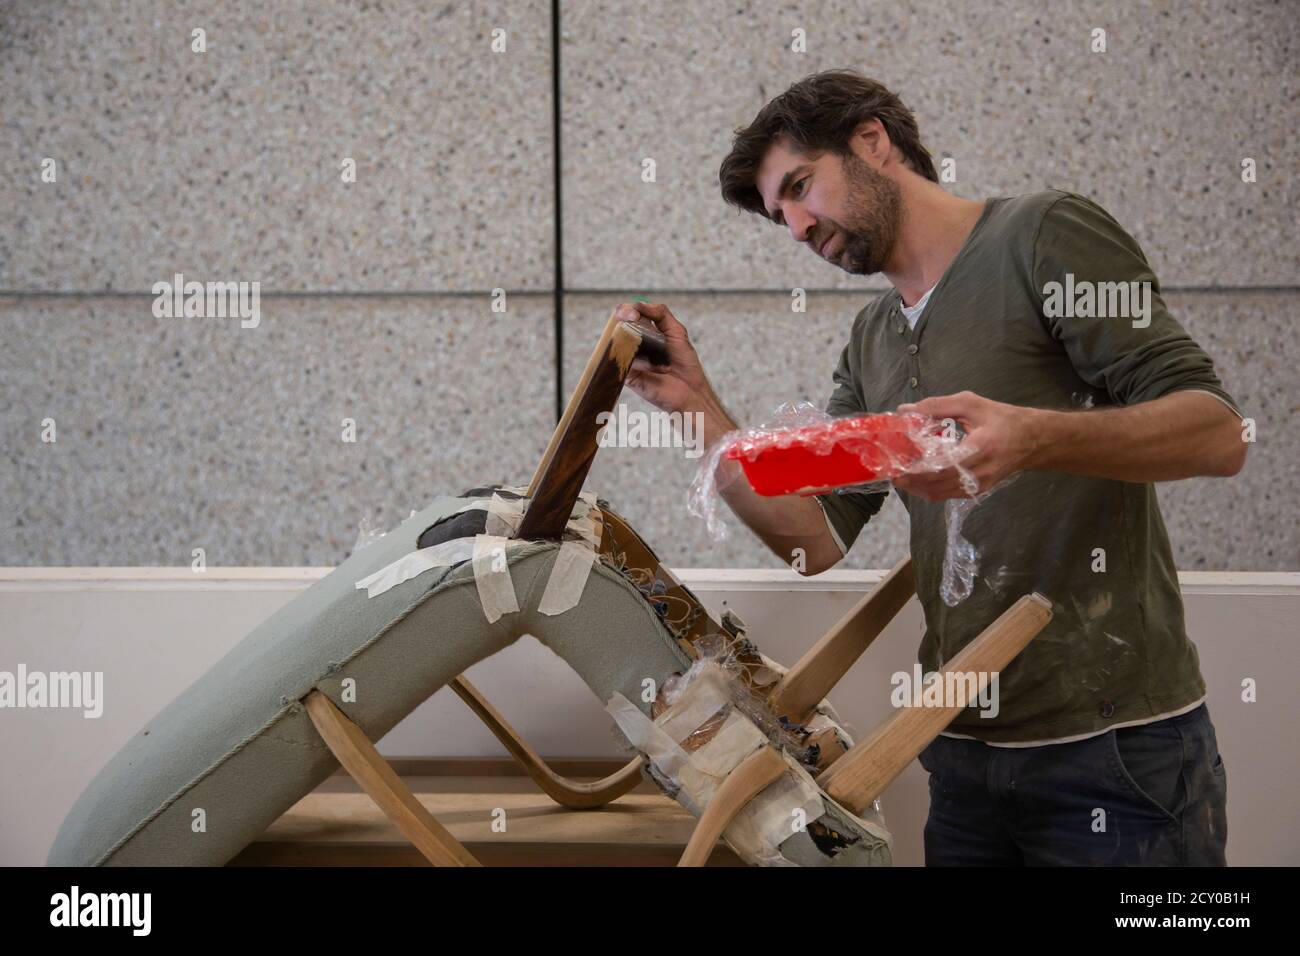 A man focused intently as he paints the legs of an antique chair Stock Photo